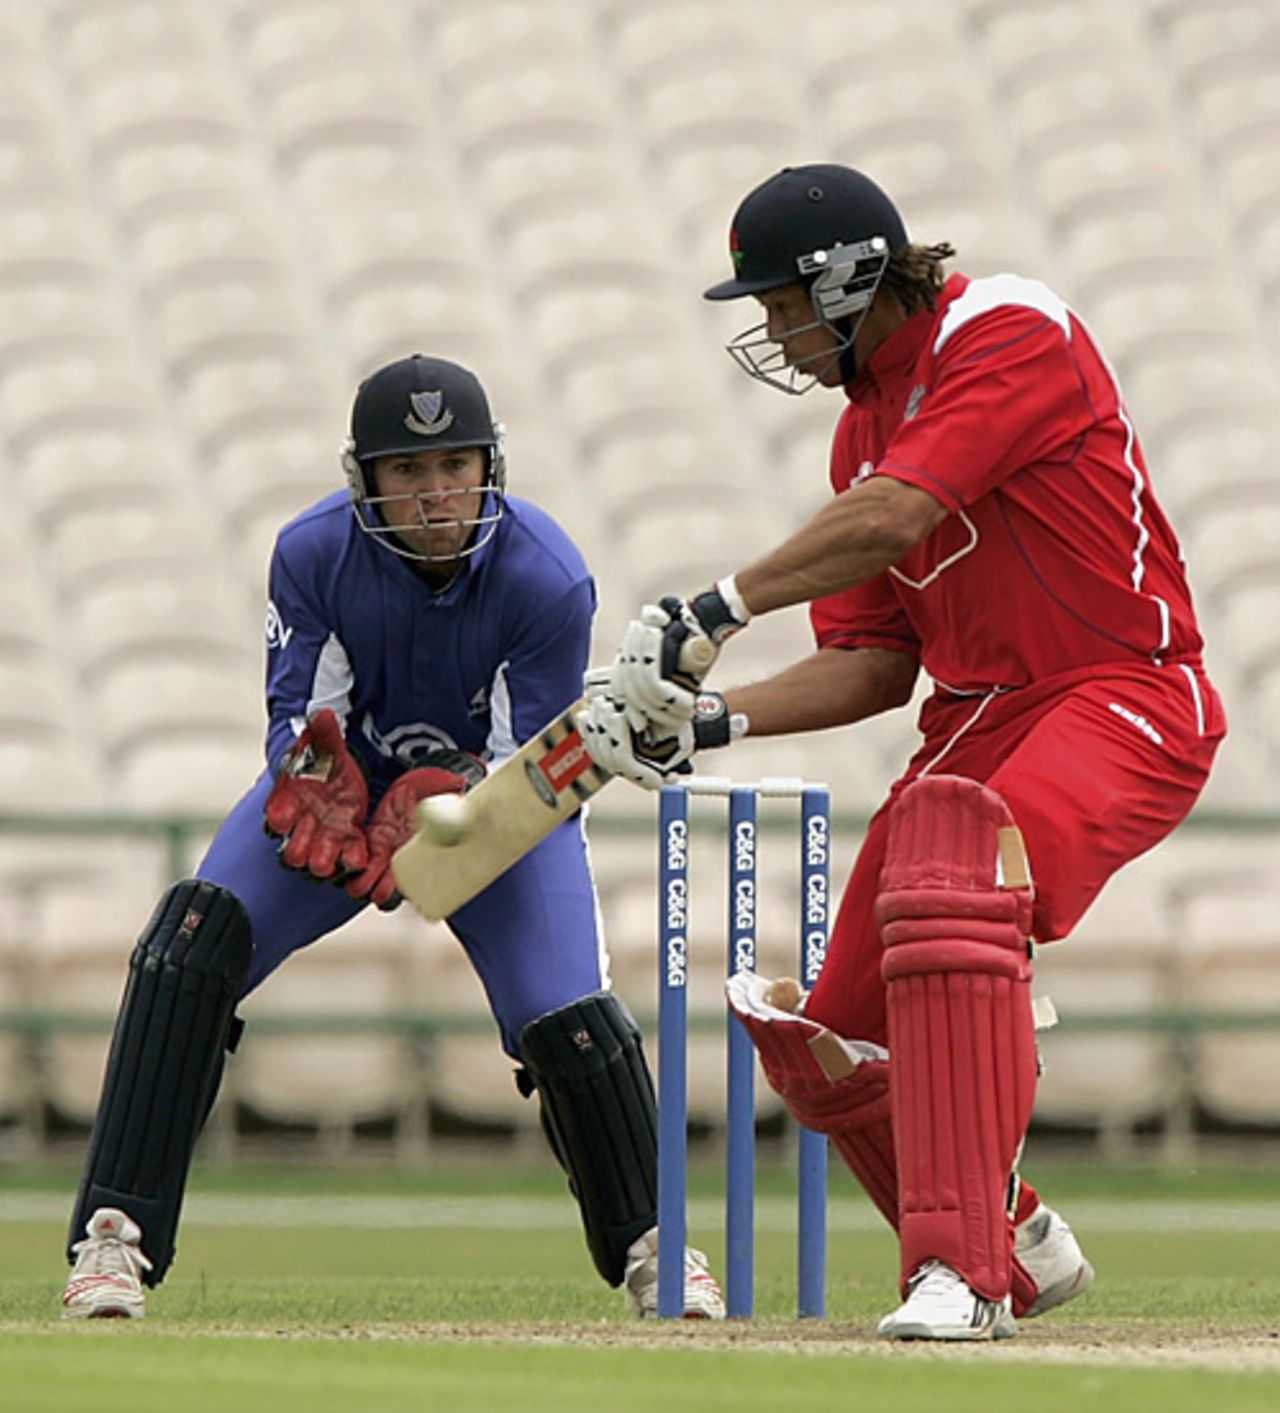 Andrew Symonds on his way his hundred, watched by Matt Prior, C&G quarter finals, Lancashire v Sussex, Old Trafford, July 15, 2005